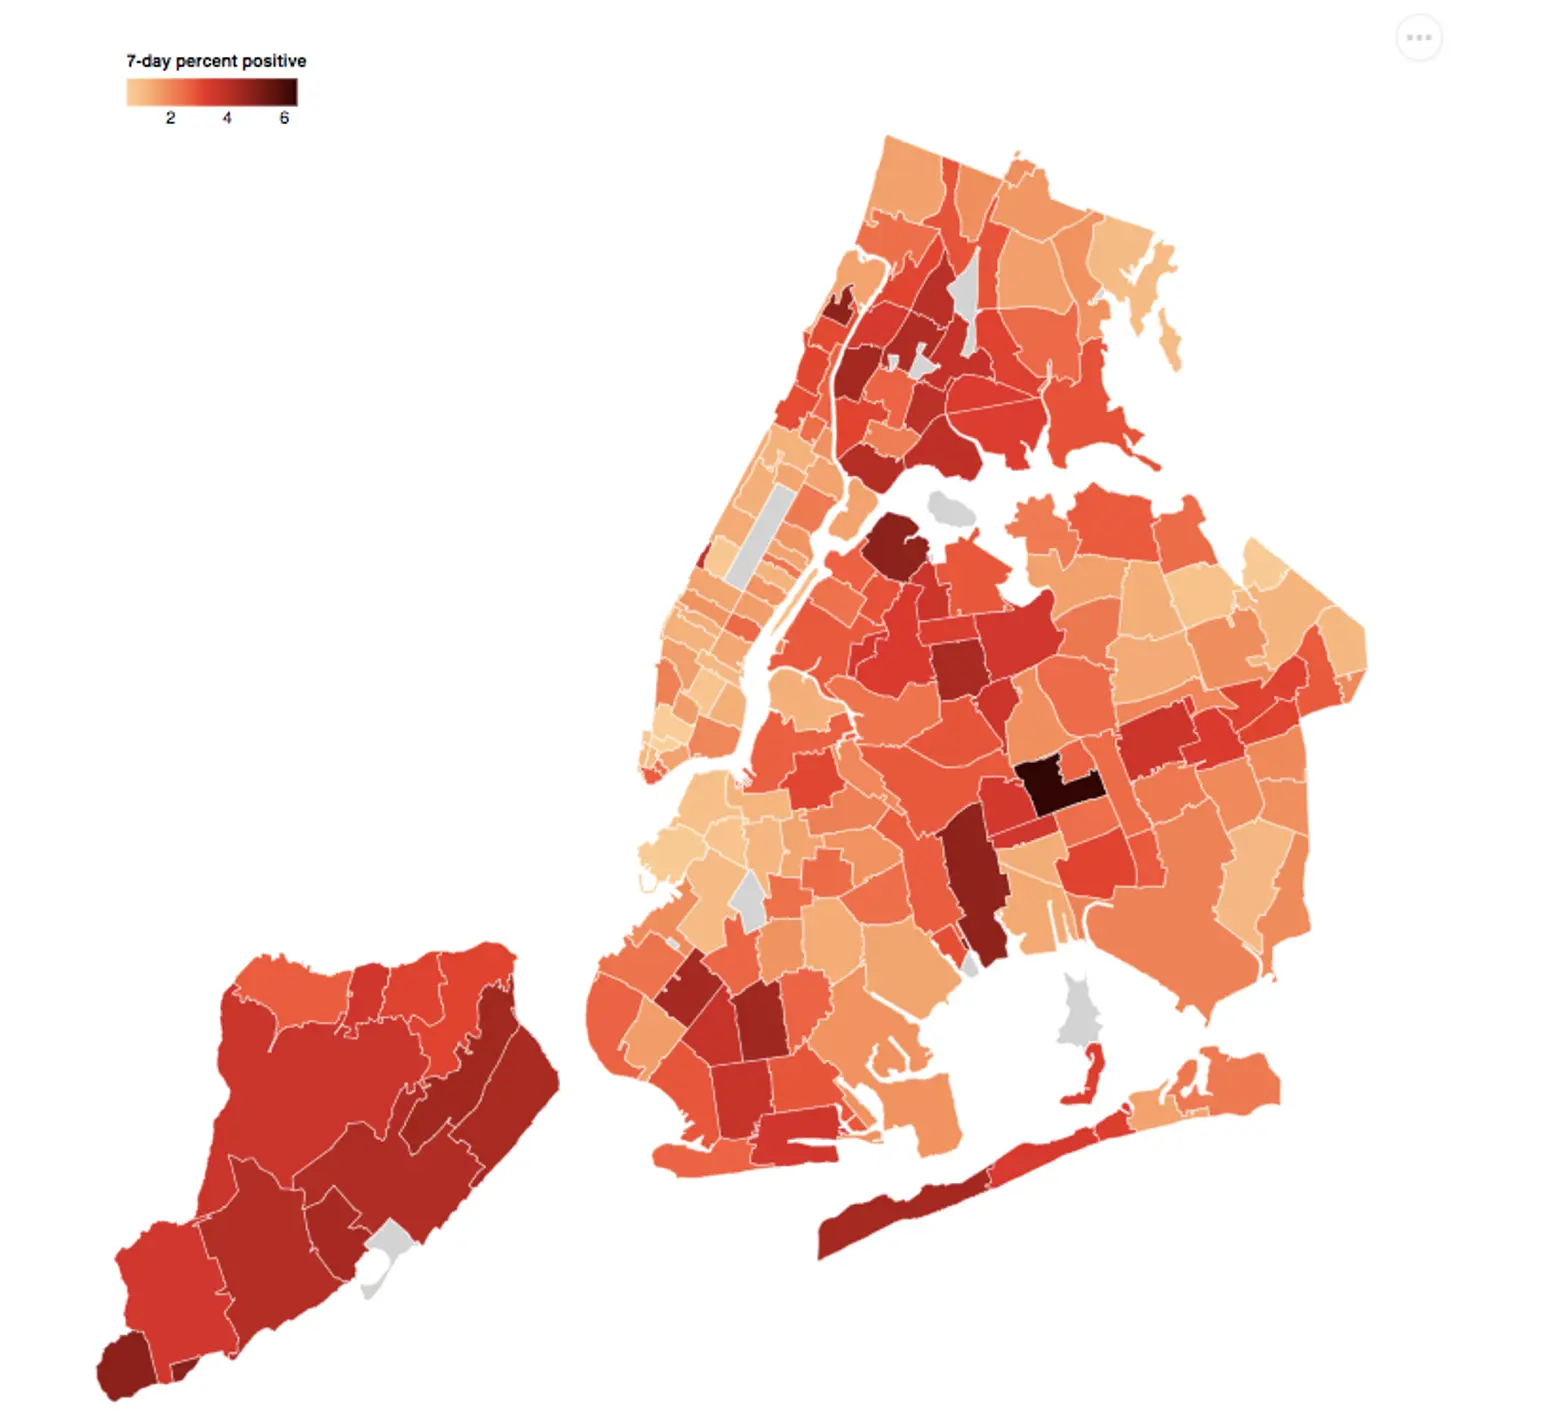 NYC releases map of positive COVID cases by ZIP code